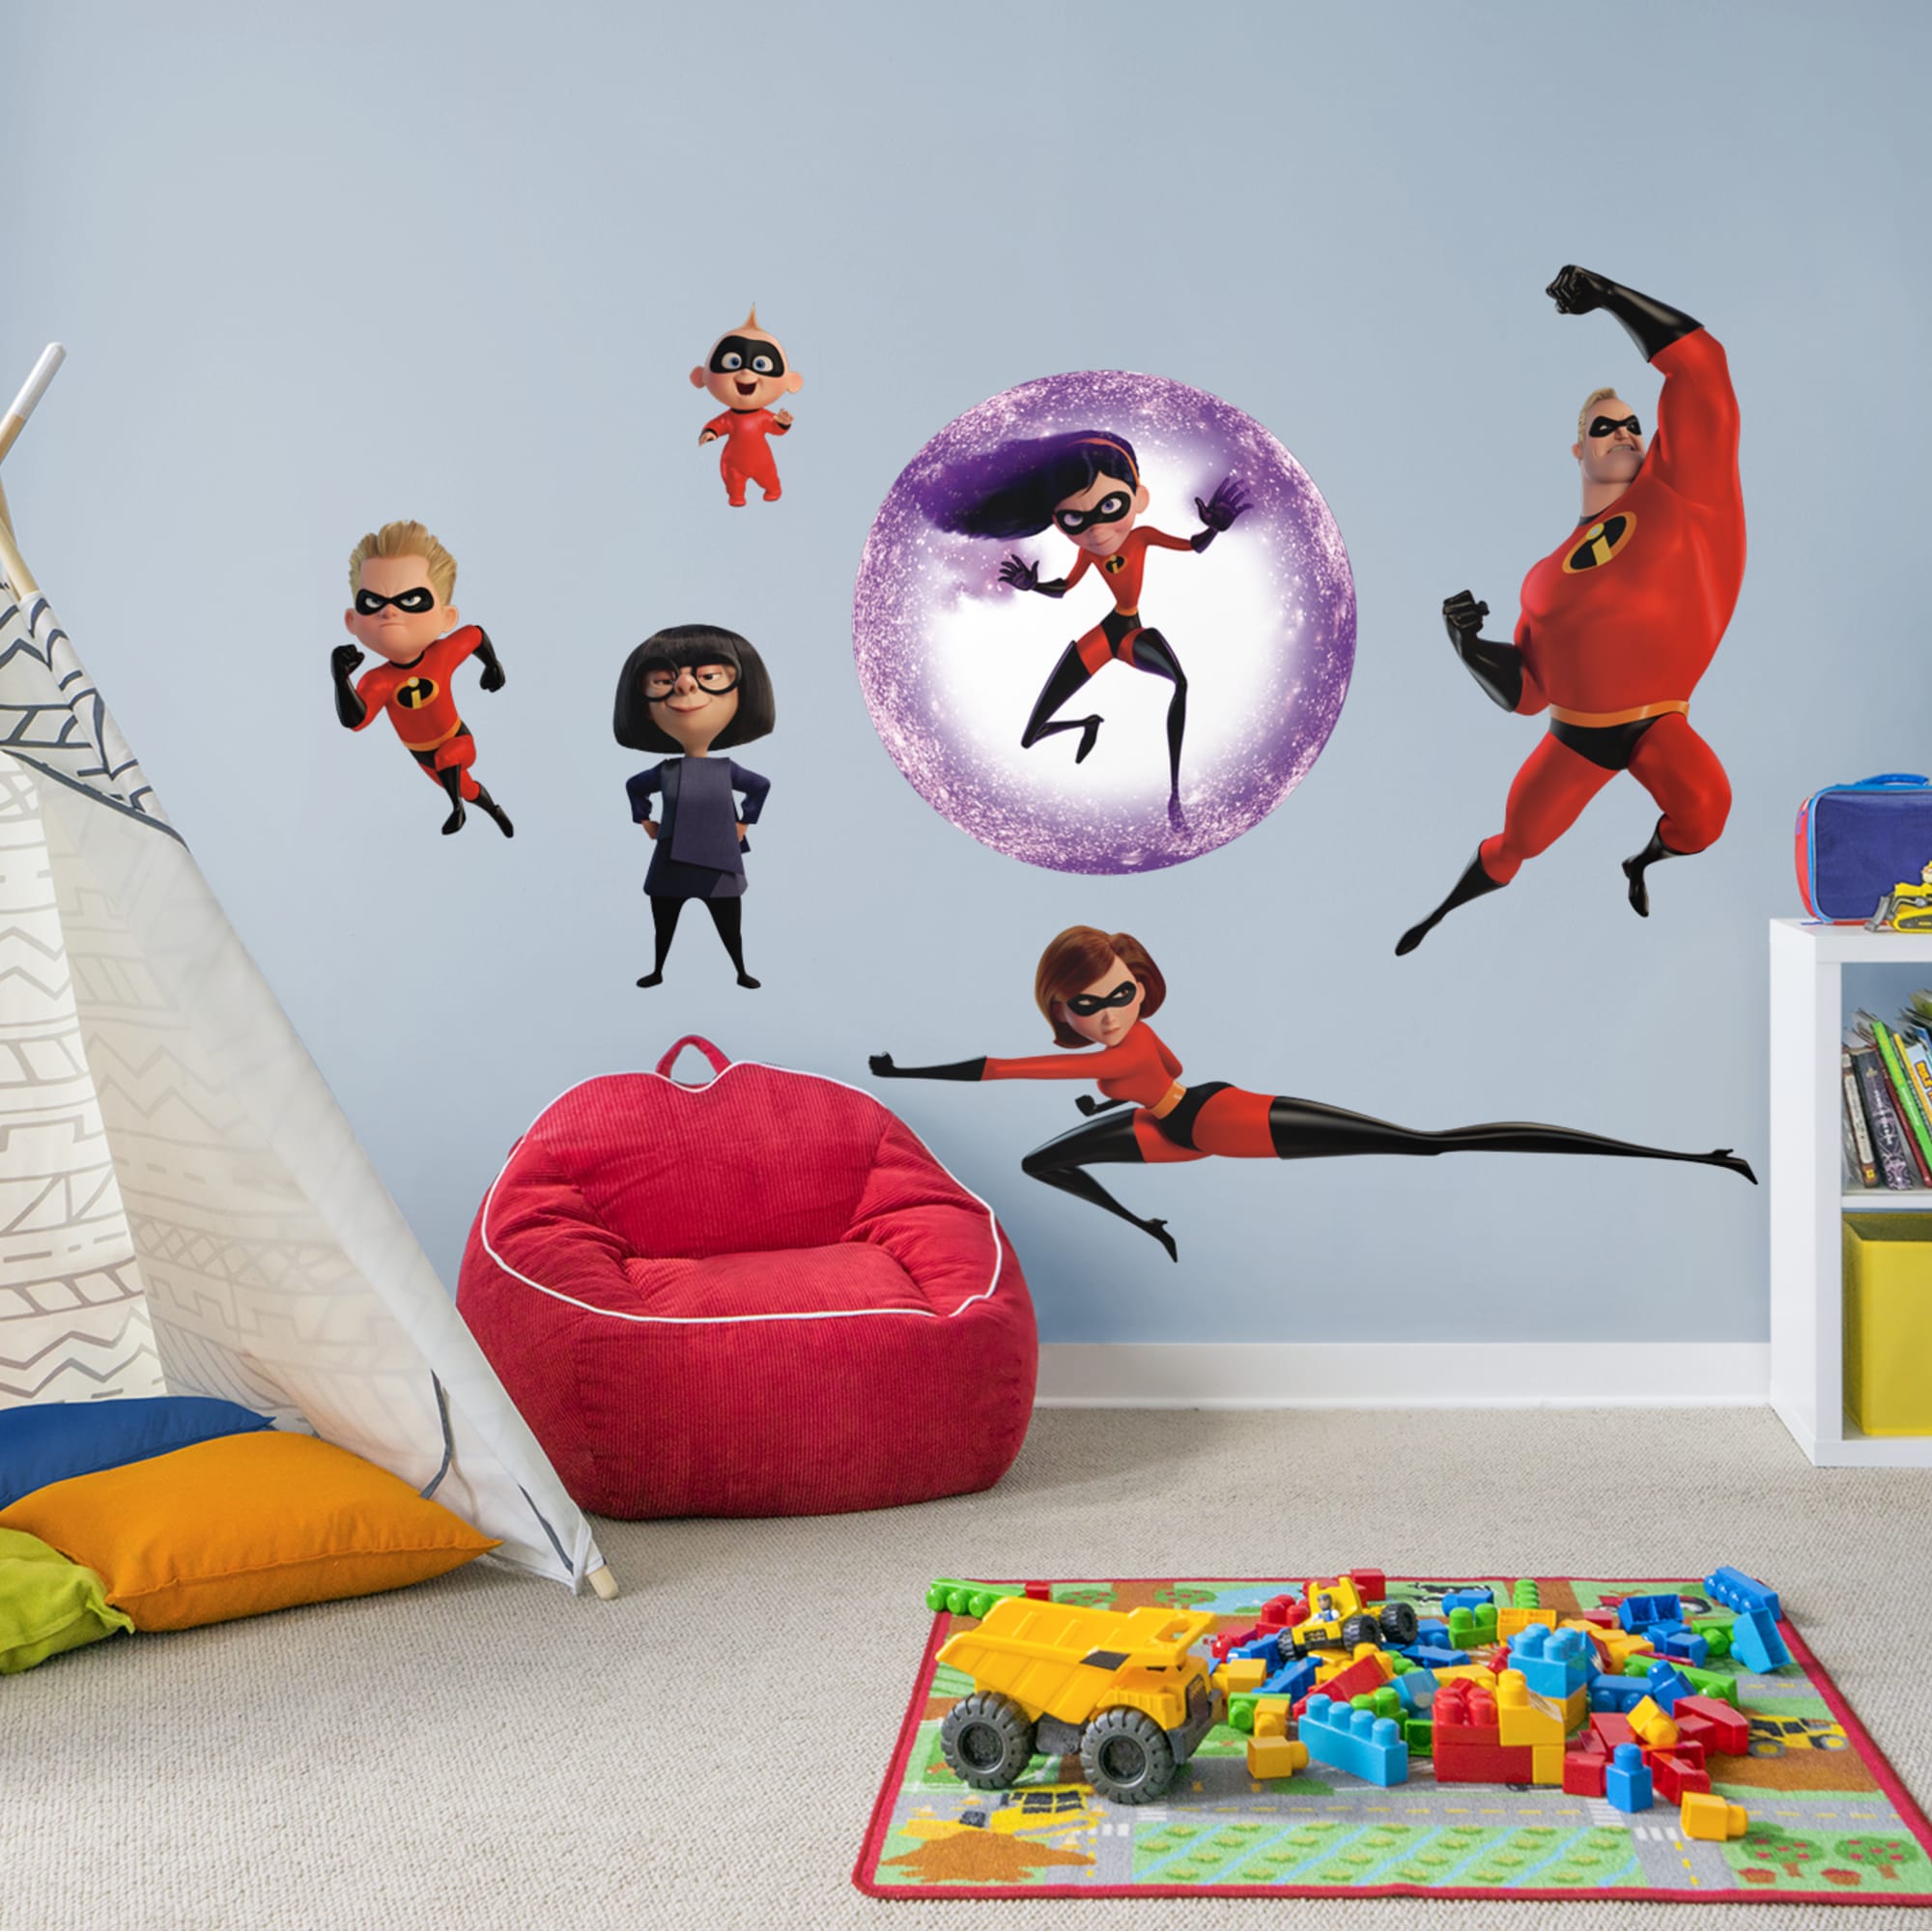 Incredibles 2: Collection - Officially Licensed Disney/PIXAR Removable Wall Decals 21.8"W x 24.3"H by Fathead | Vinyl